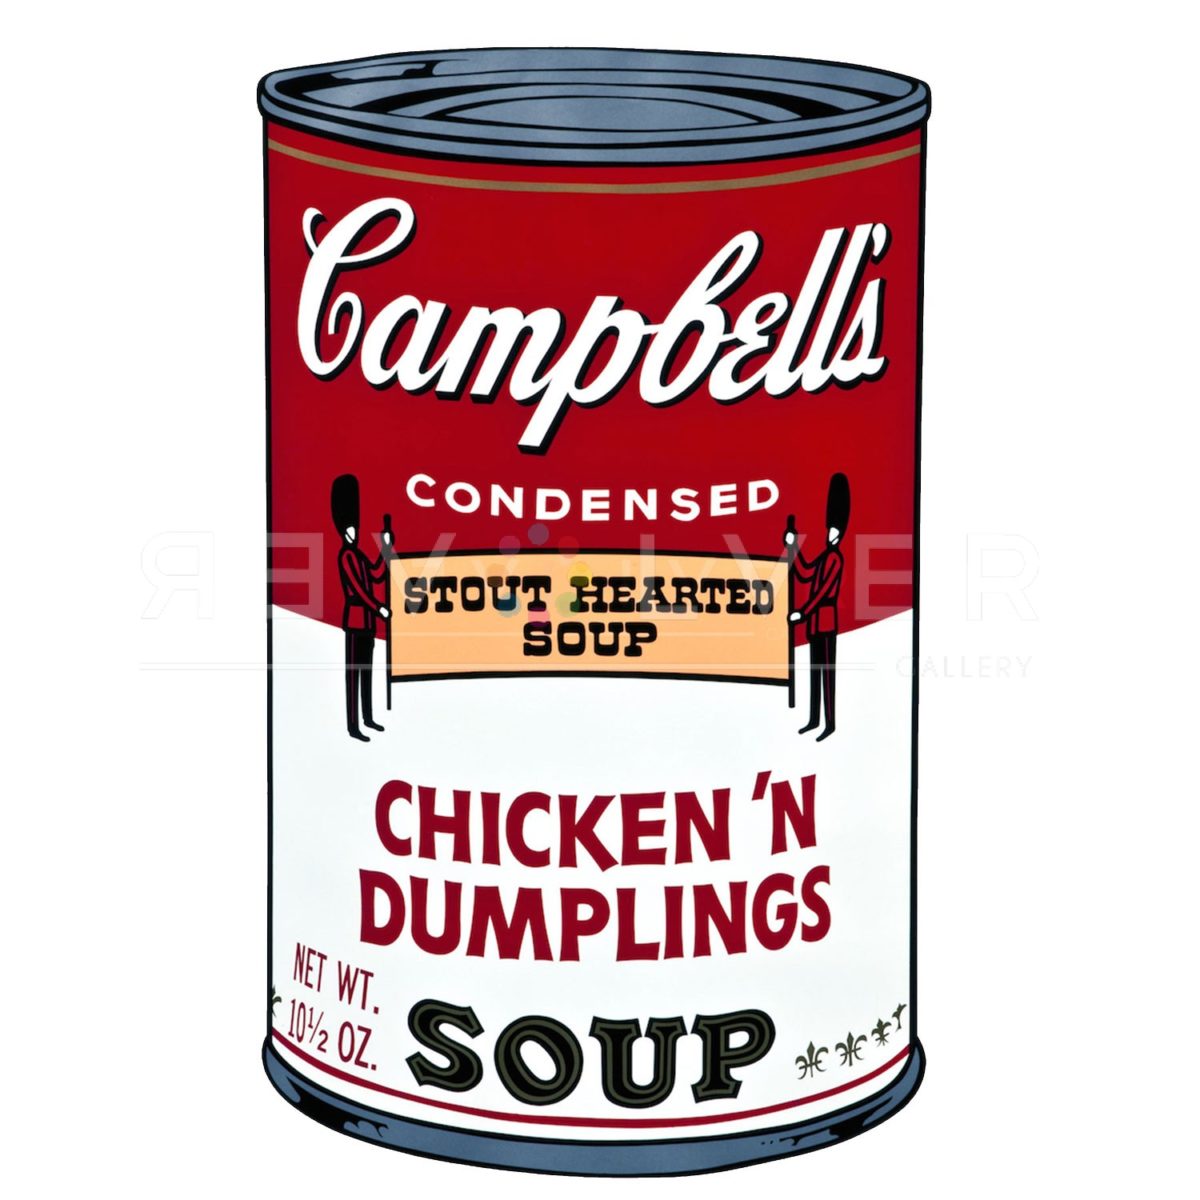 Campbell's Soup Cans II: Chicken 'N Dumplings print by Andy Warhol from 1969. Red and white soup can with two british guards holding a banner saying "stour hearted soup."